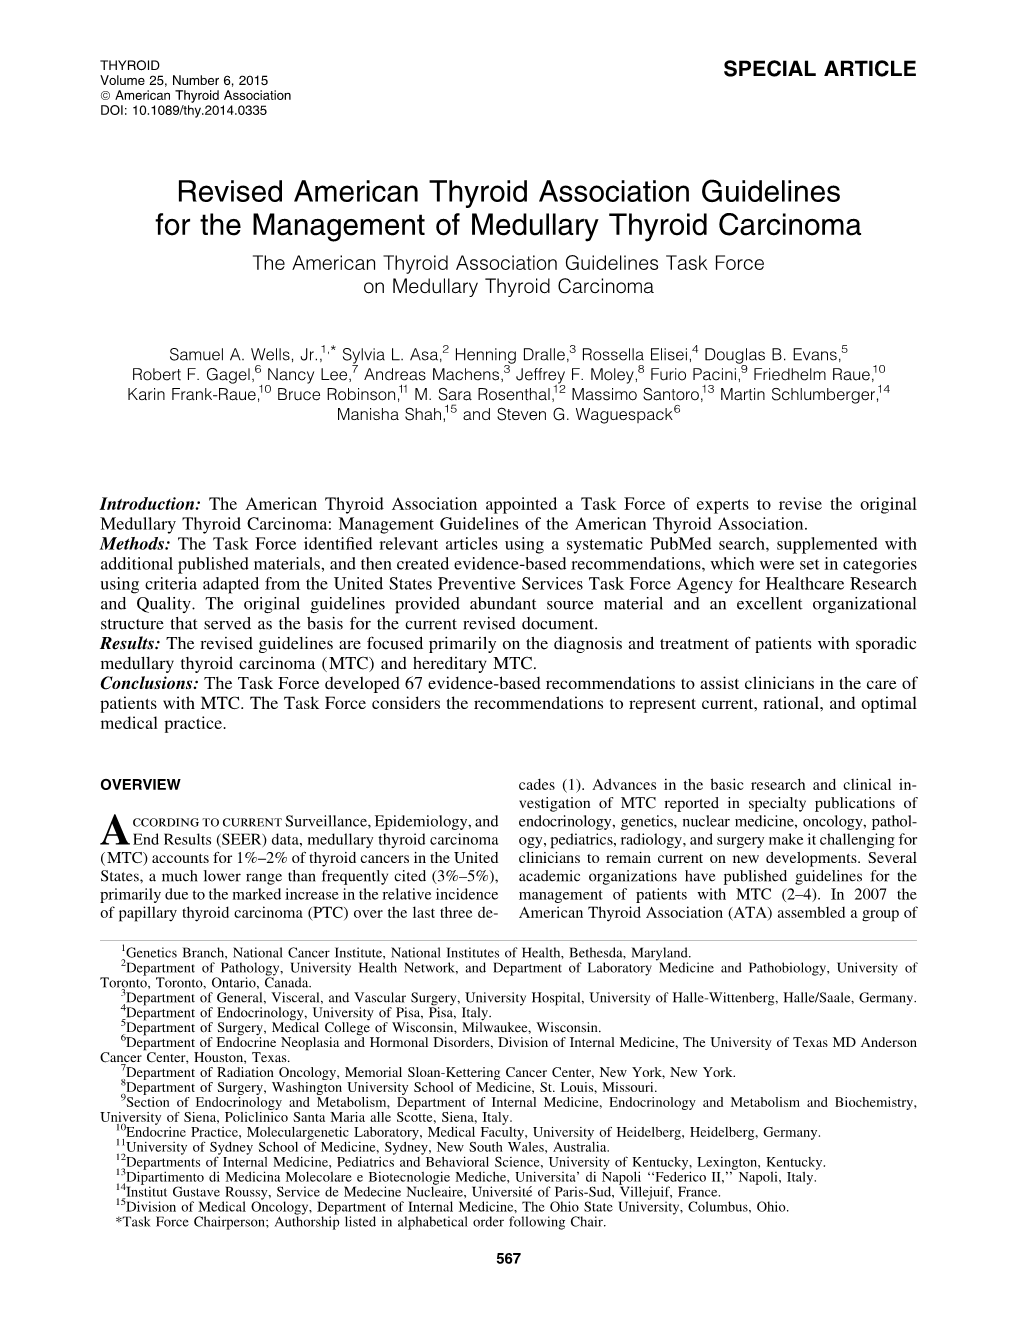 Revised American Thyroid Association Guidelines For